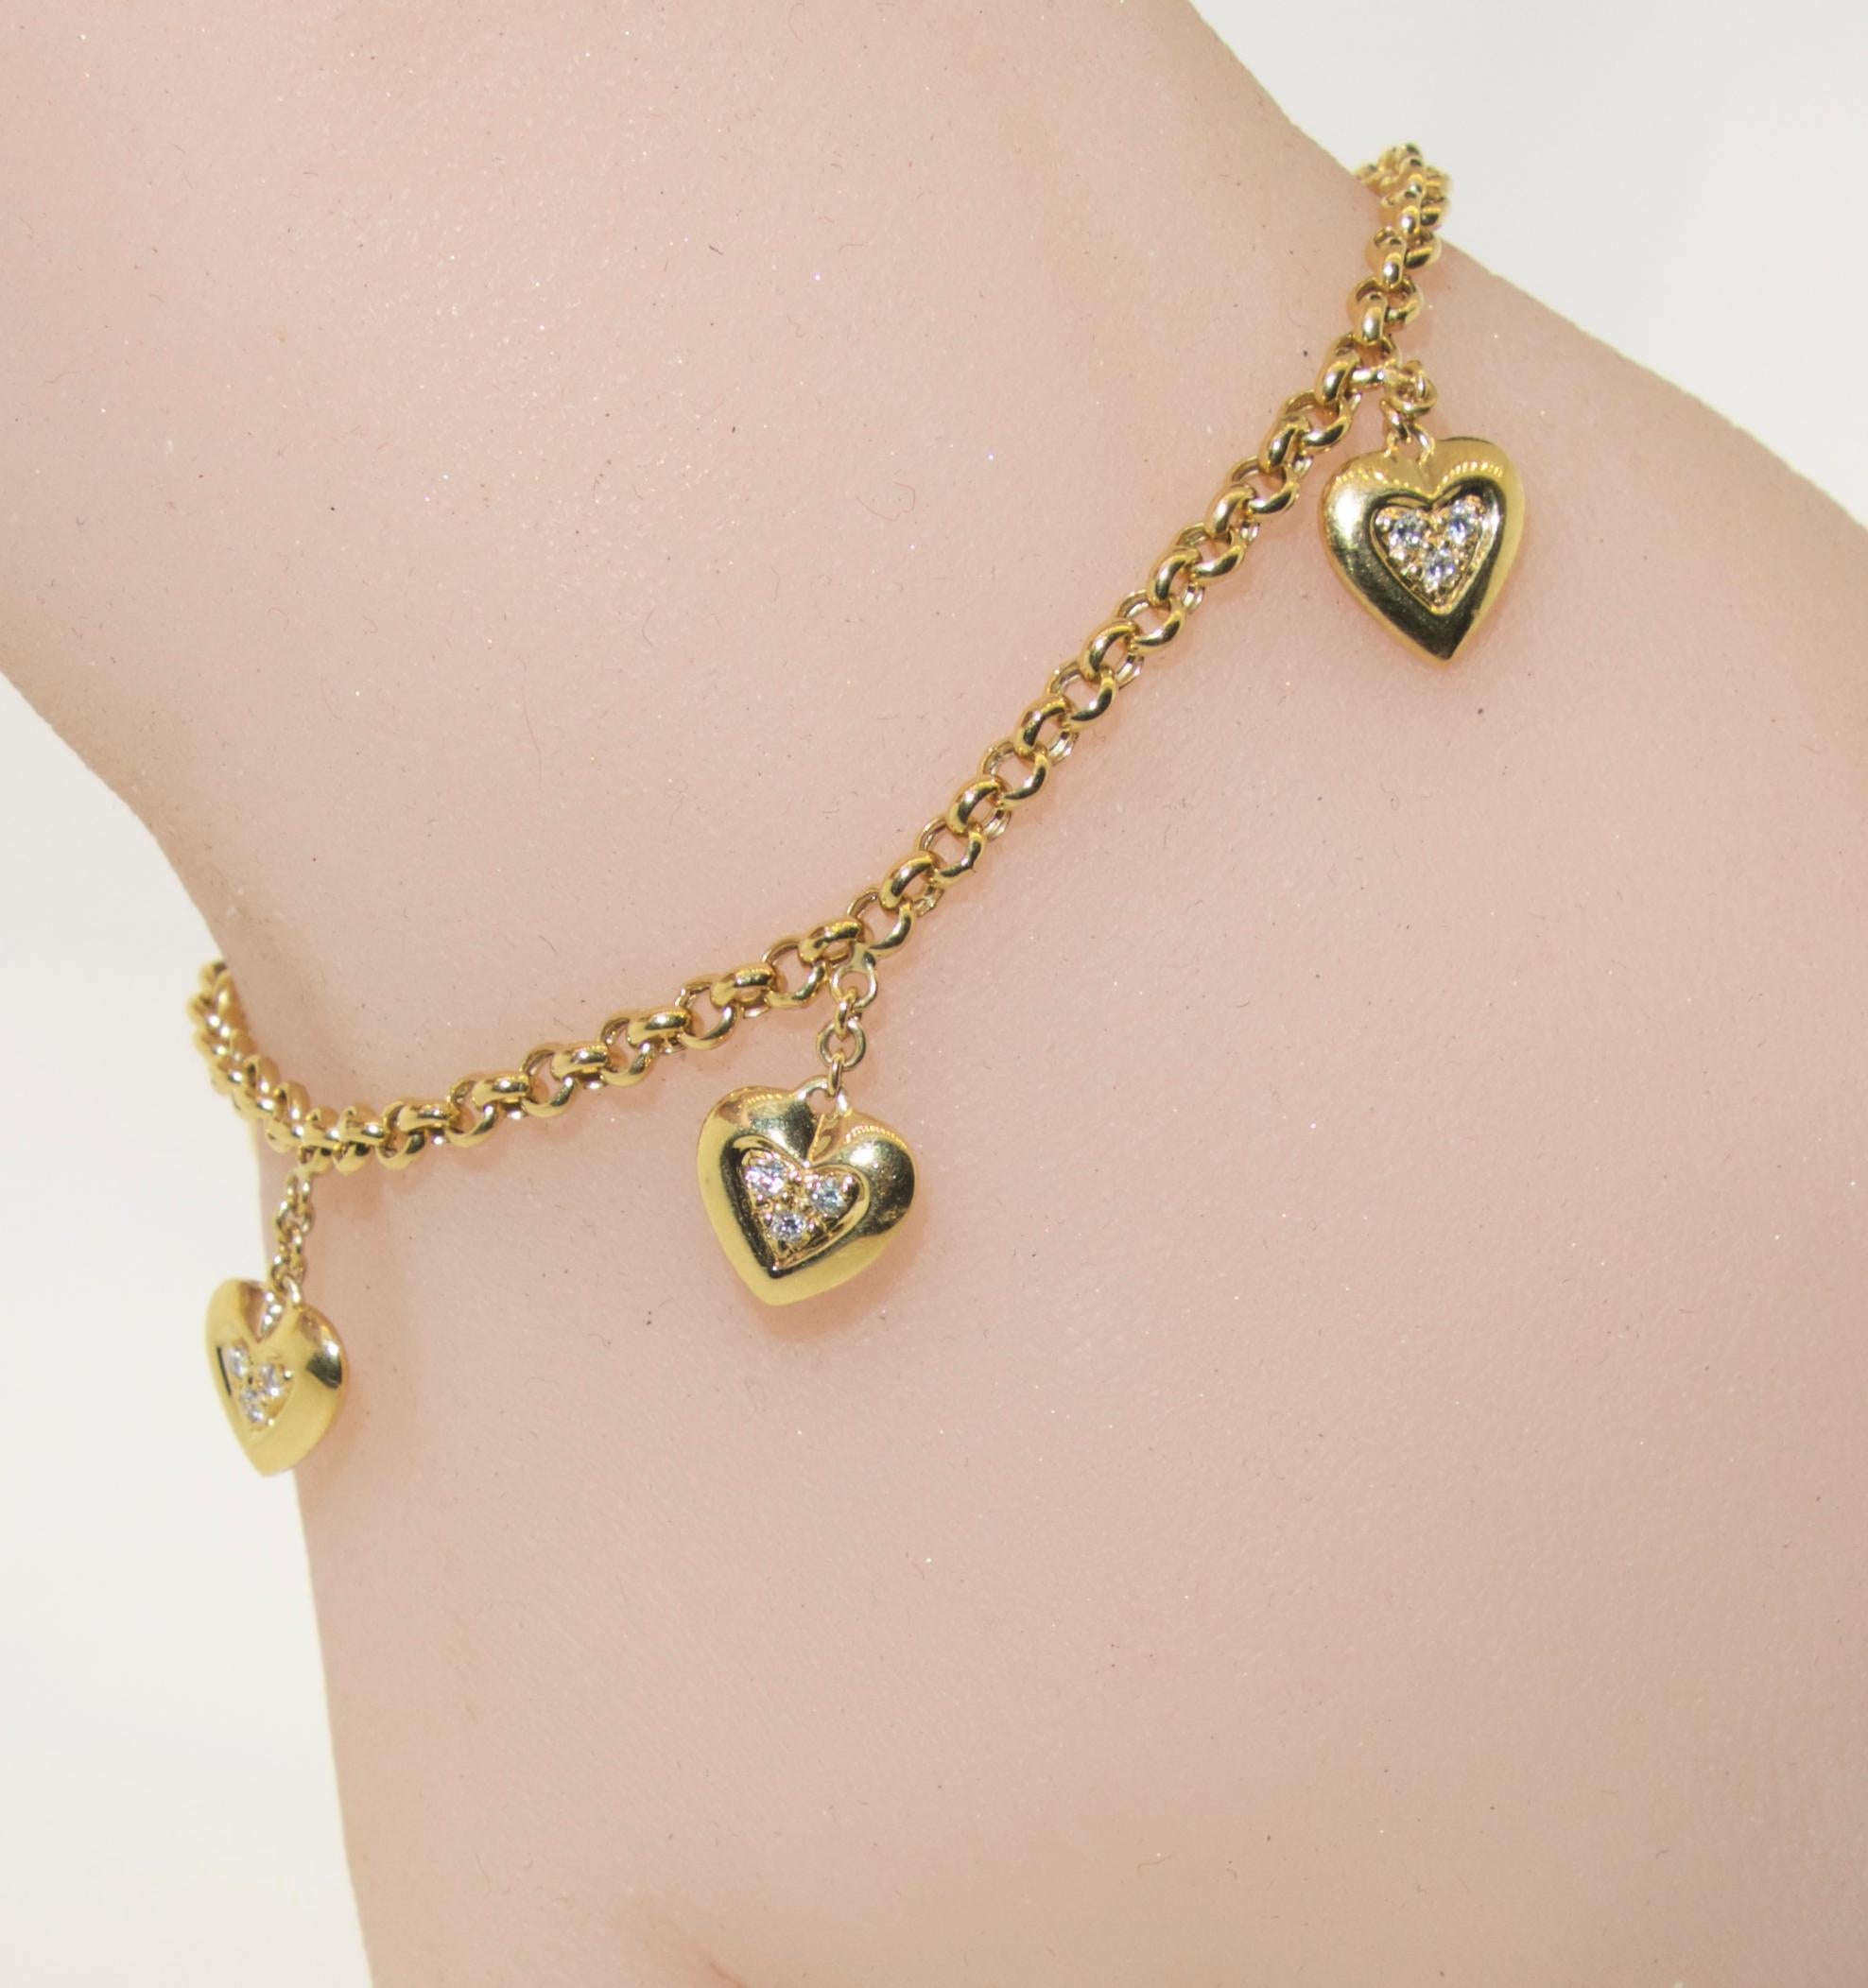 Mauboussin heart bracelet with small diamonds.  Signed and numbered from the  world famous jewelry house of Mauboussin, this charming bracelet has 15 fine white small diamonds set into the hearts.  The bracelet is 7 inches long.